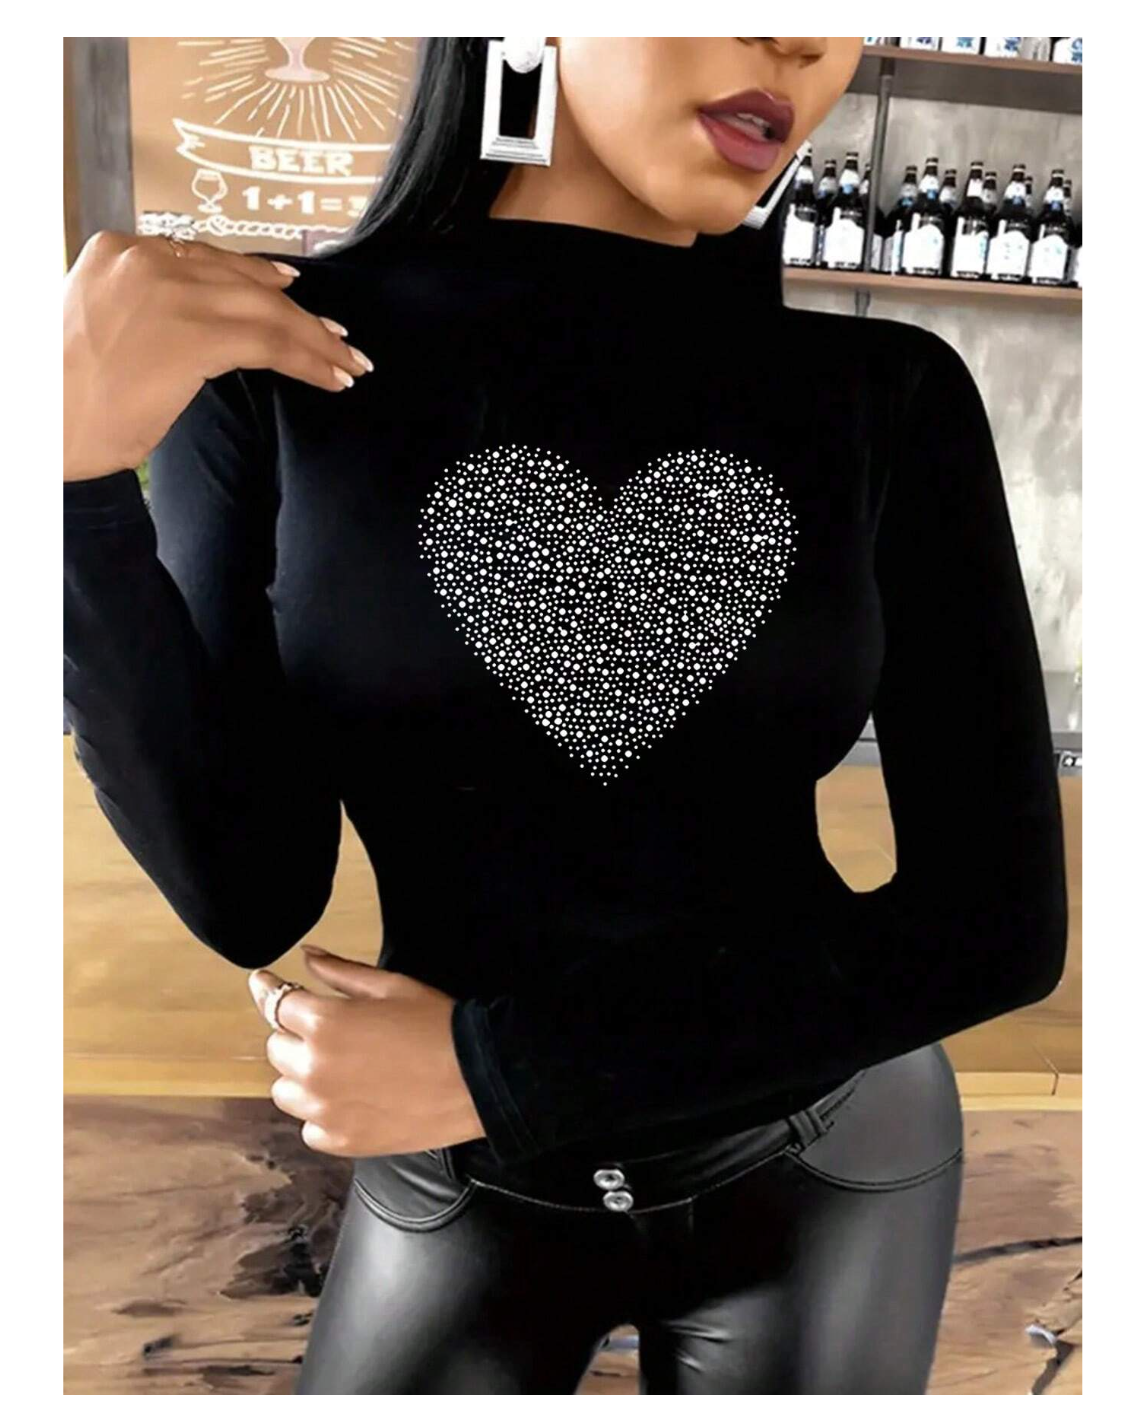 Heart Slayr: Unleashing Style with the Stand Collar Long Sleeve T-Shirt Adorned in Heart Shapes!